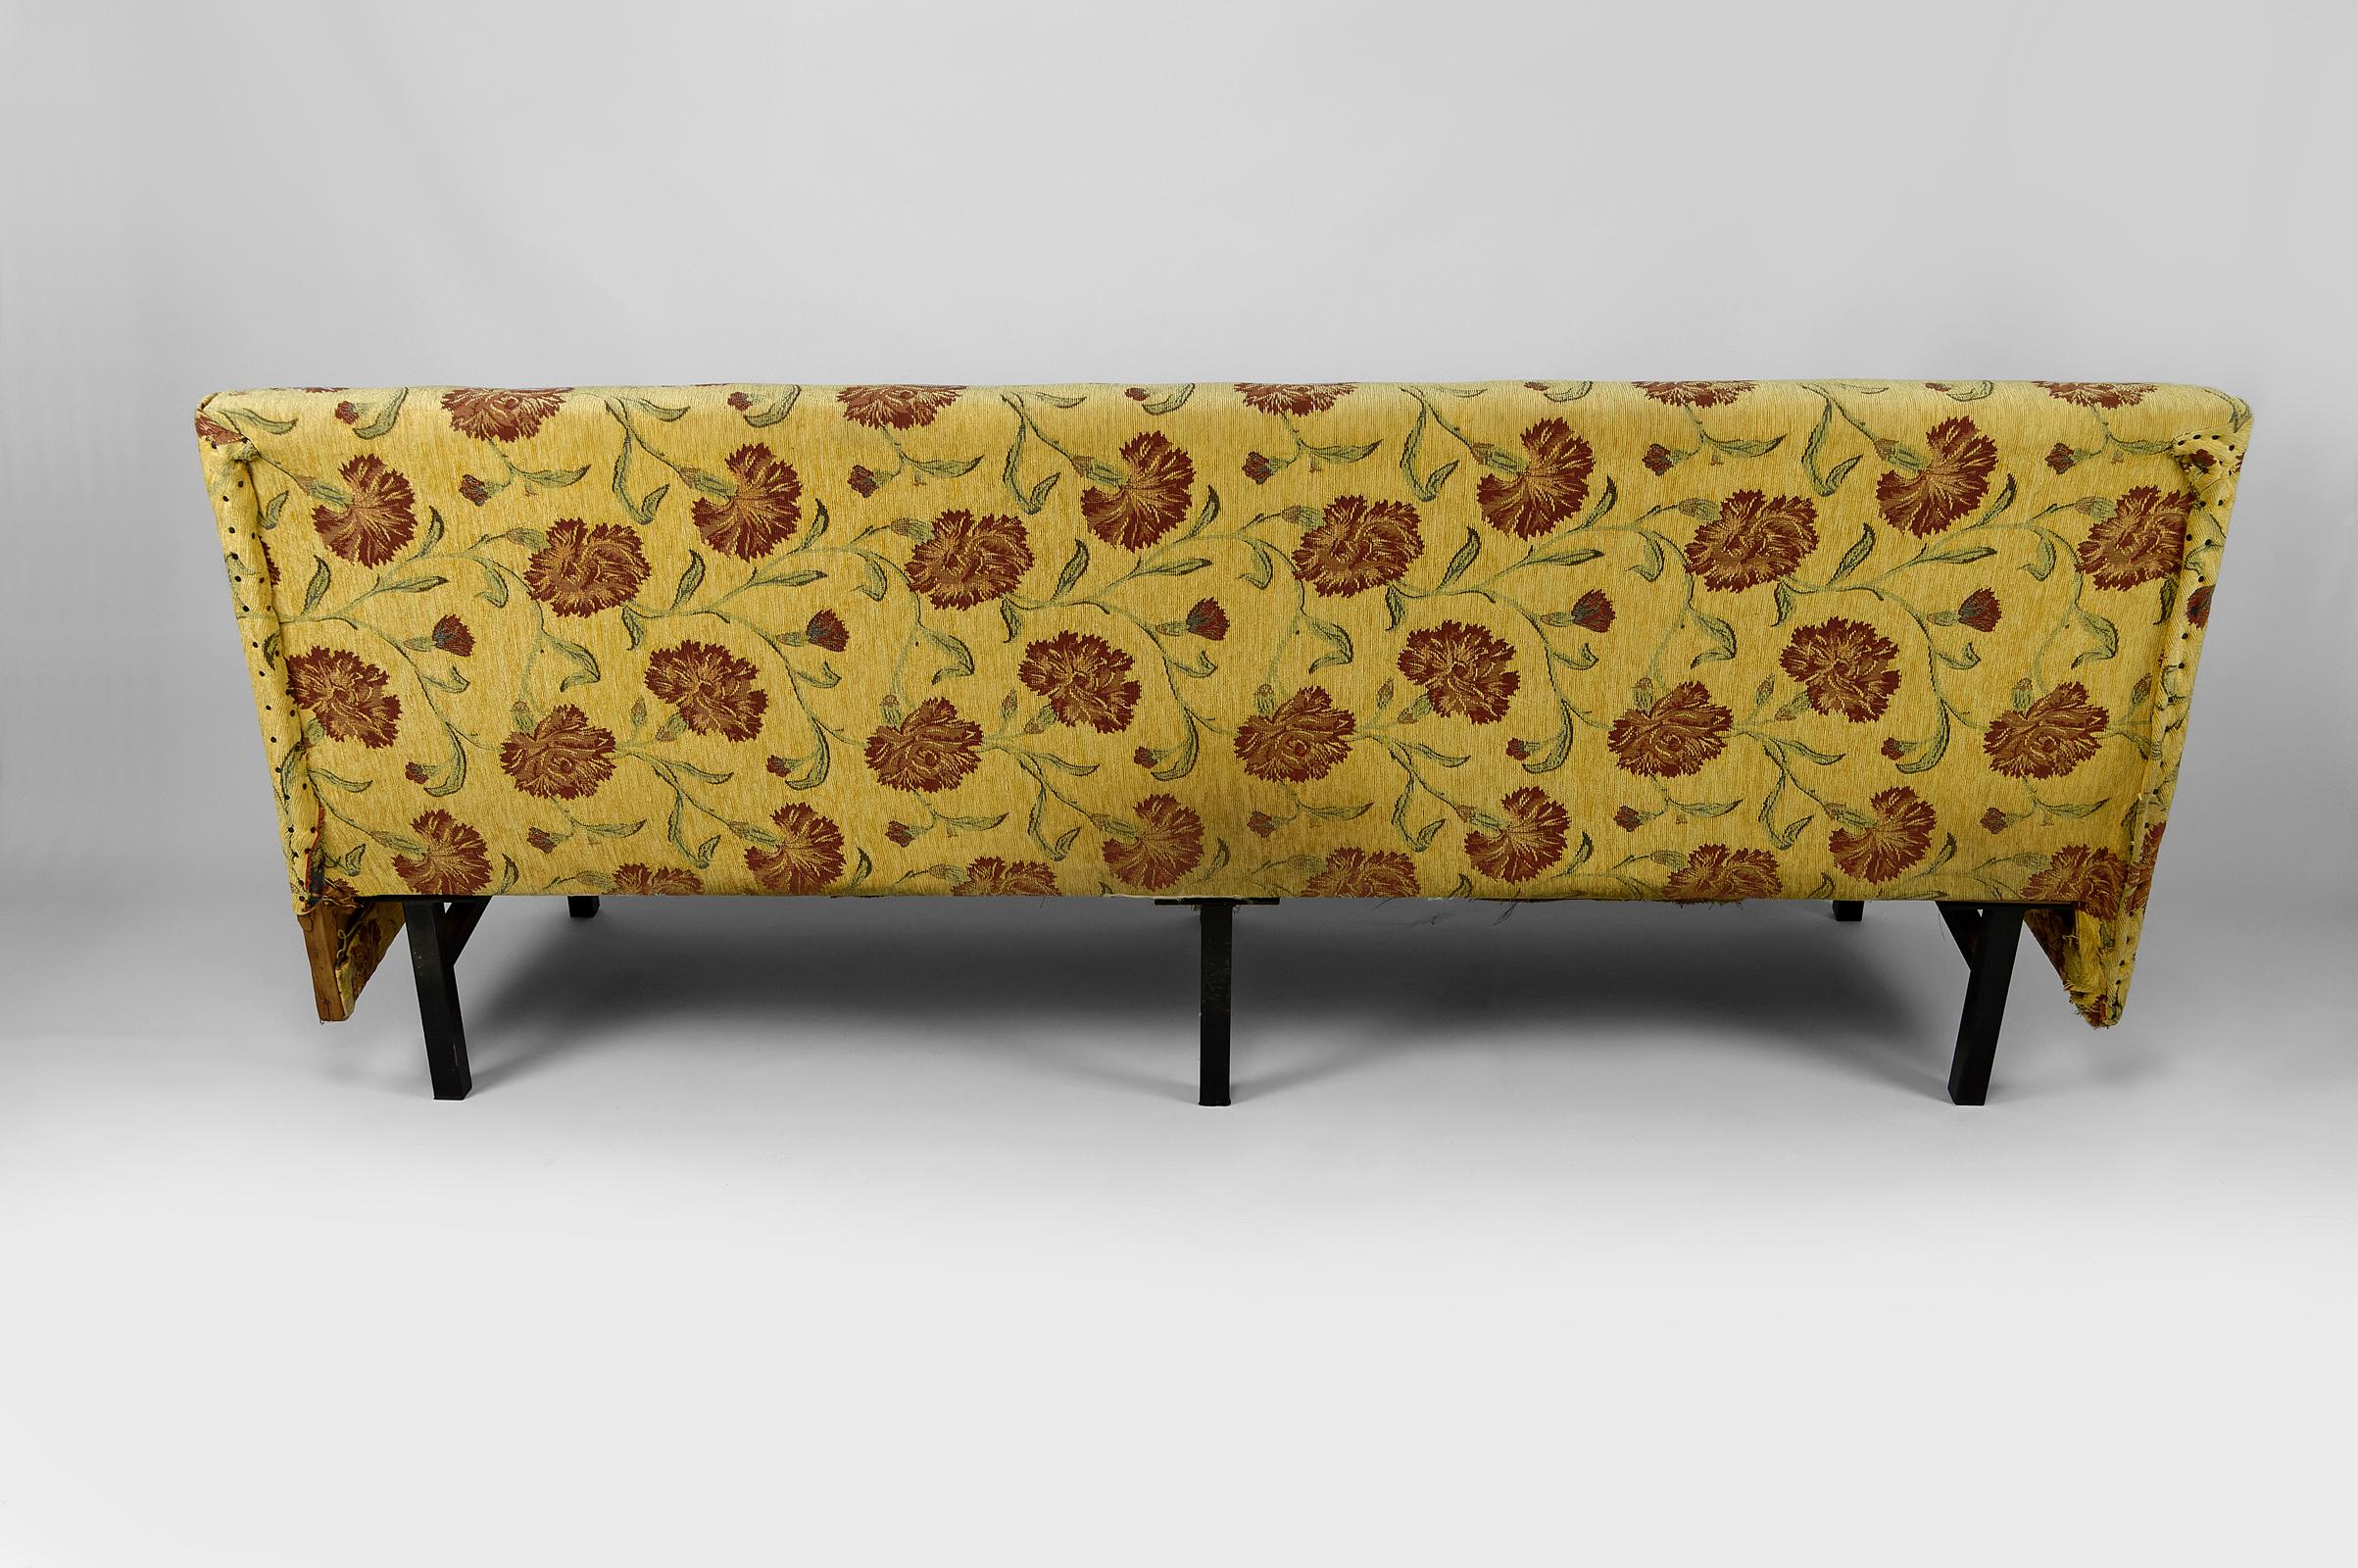 Vintage Boho sofa with yellow and red floral fabric, France, Circa 1960 For Sale 5